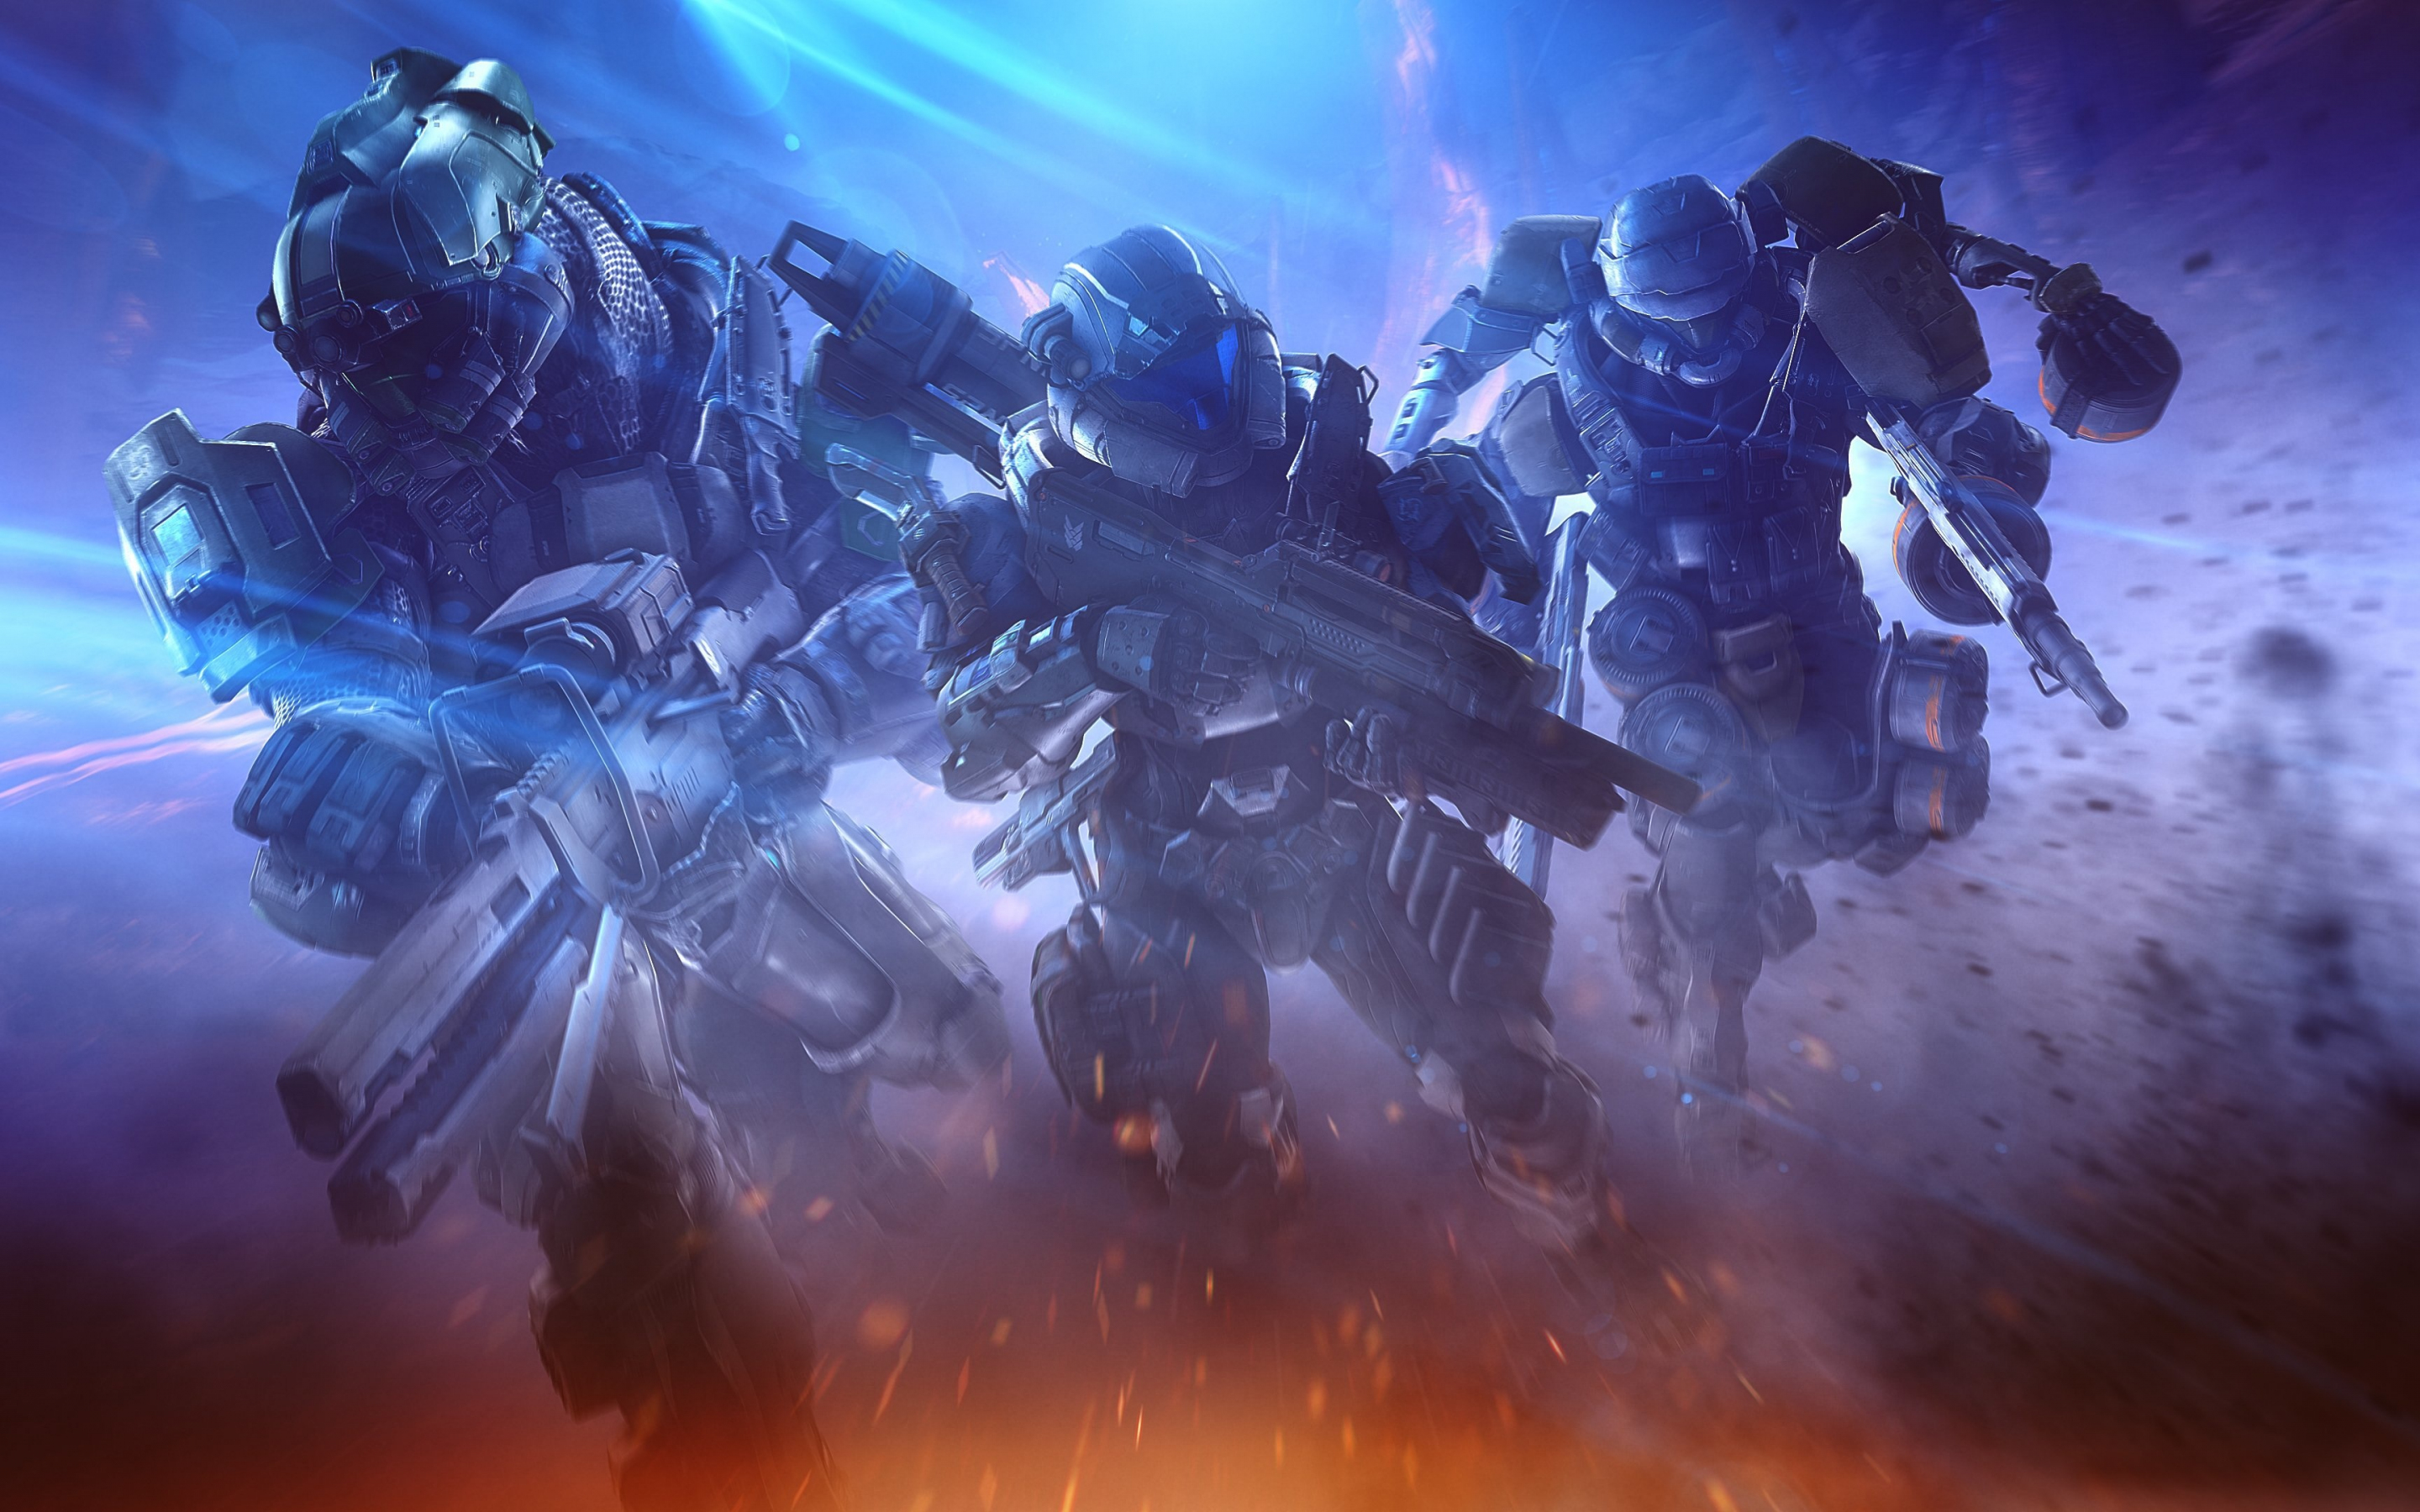 Soldiers, Halo, Spartans team, video game, 2880x1800 wallpaper